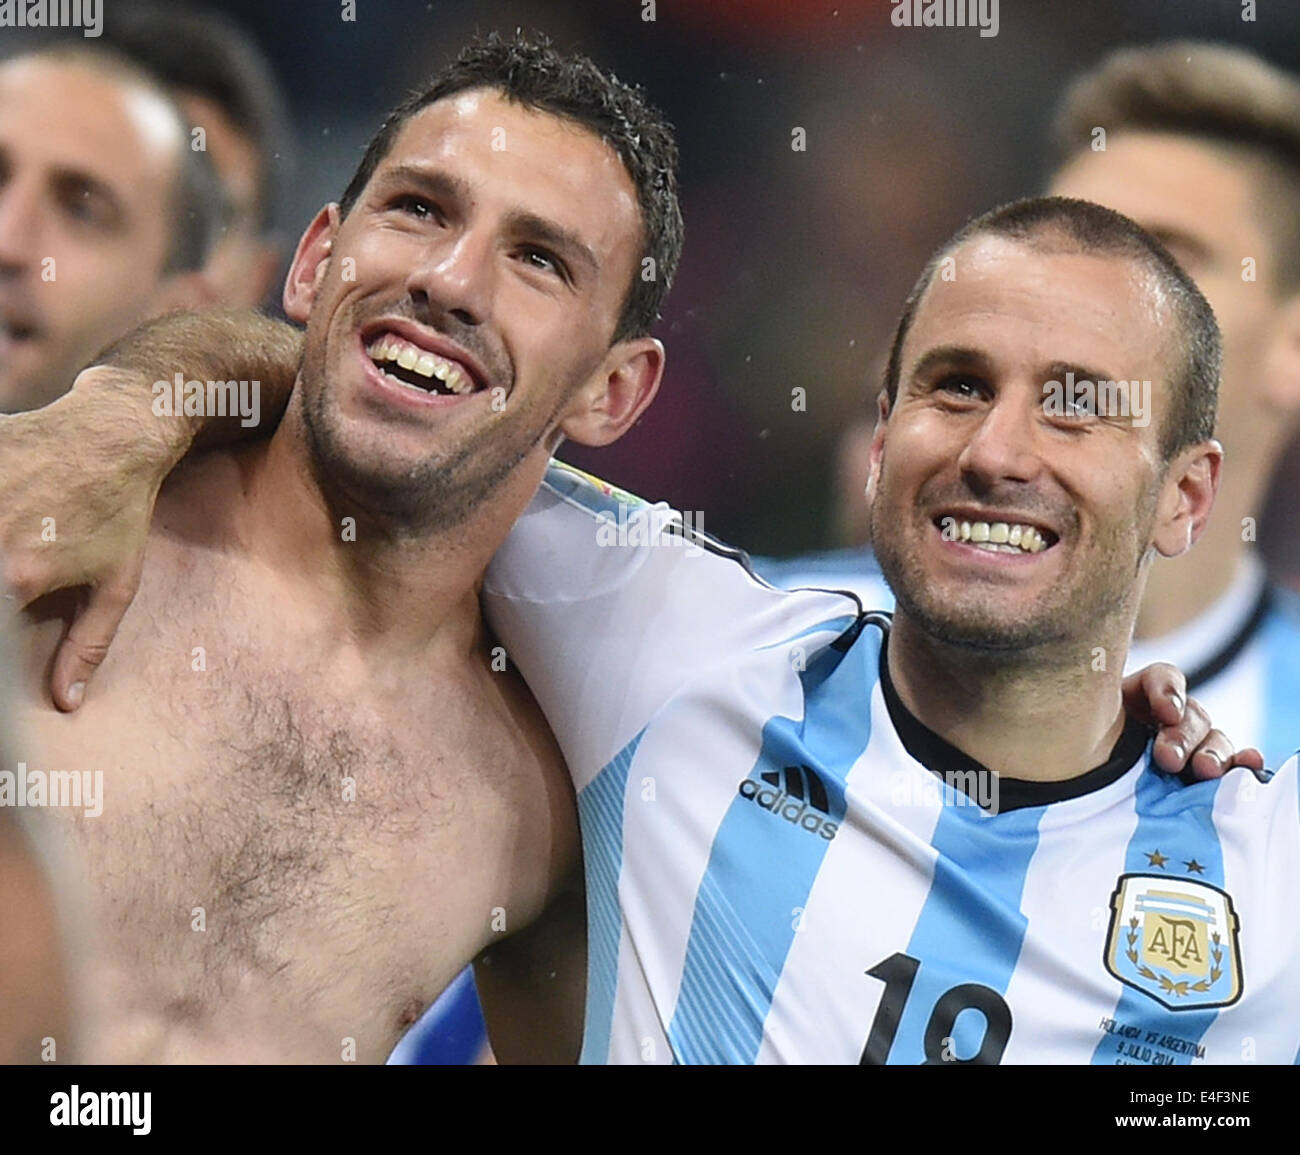 Sao Paulo, Brazil. 09th July, 2014. Argentina's Maxi Rodriguez (L) celebrates with his team mate Rodrigo Palacio after winning the penalty shoot-out of the FIFA World Cup 2014 semi-final soccer match between the Netherlands and Argentina at the Arena Corinthians in Sao Paulo, Brazil, 09 July 2014. Photo: Marius Becker/dpa/Alamy Live News Stock Photo